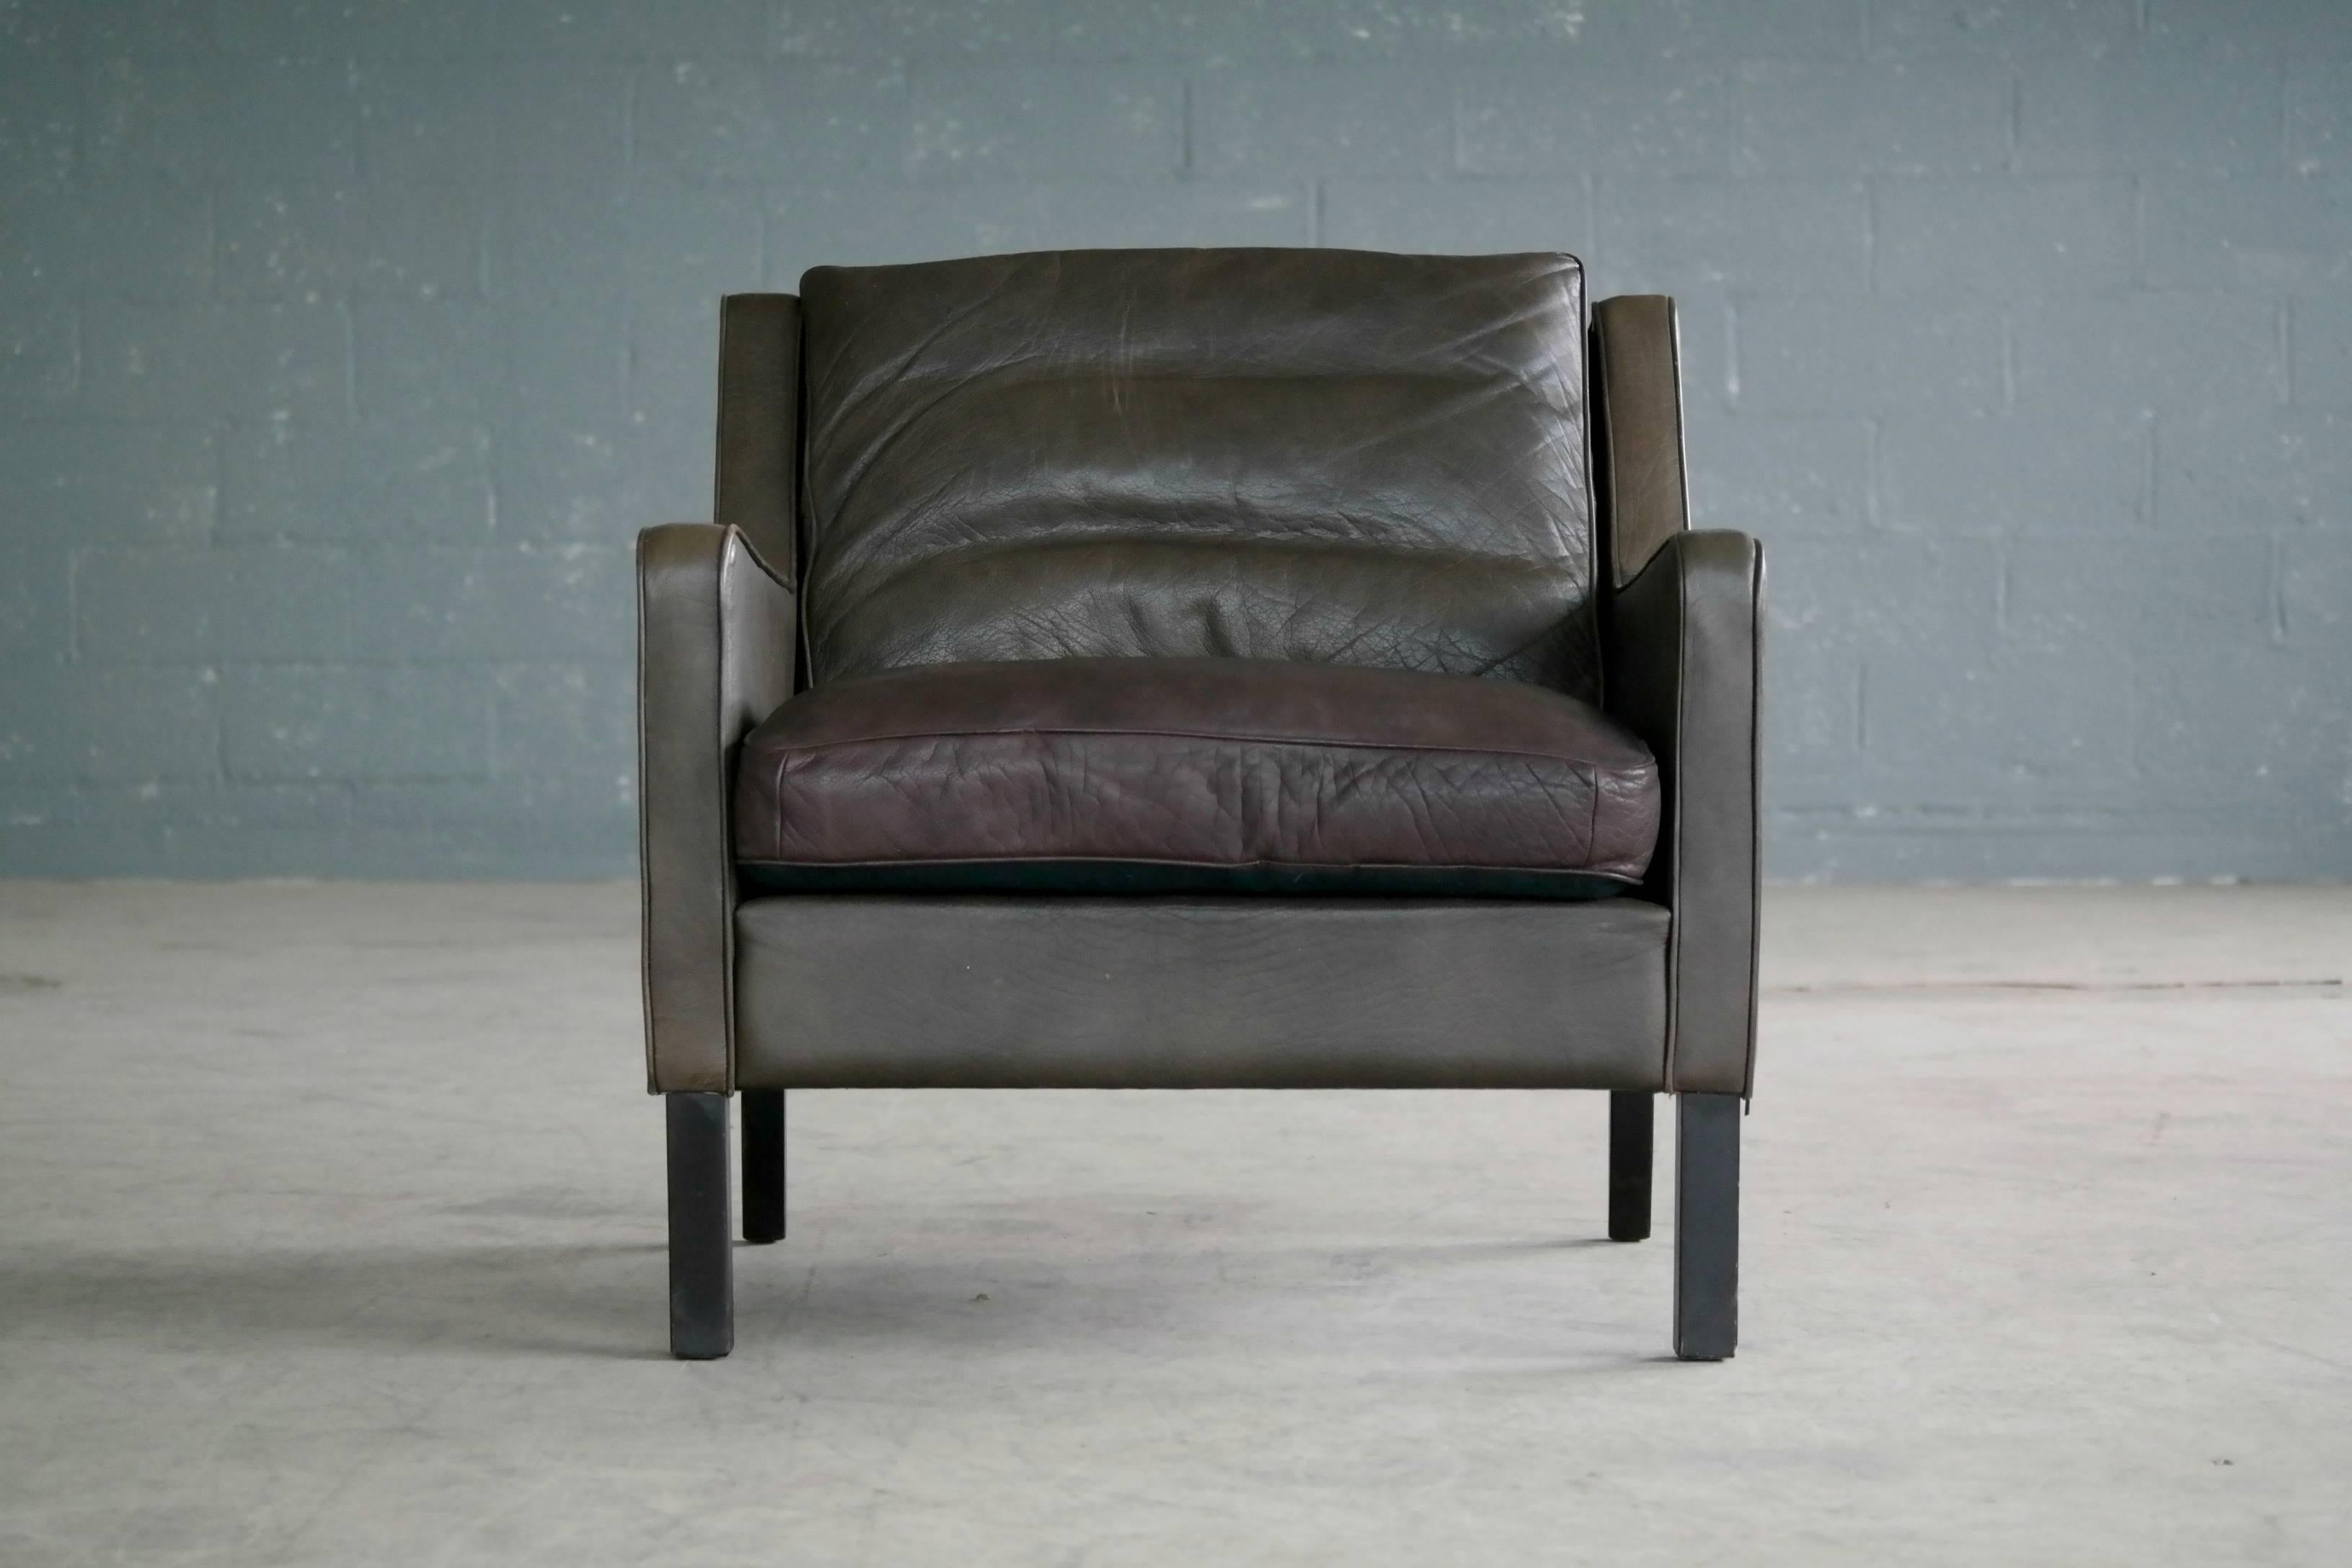 Classic Borge Mogensen style low back lounge chair in dark olive colored leather designed by Georg Thams for Vejen Polstermobelfabrik, Denmark. Very nice quality leather with great patina and age wear including a little bit of color fading on the